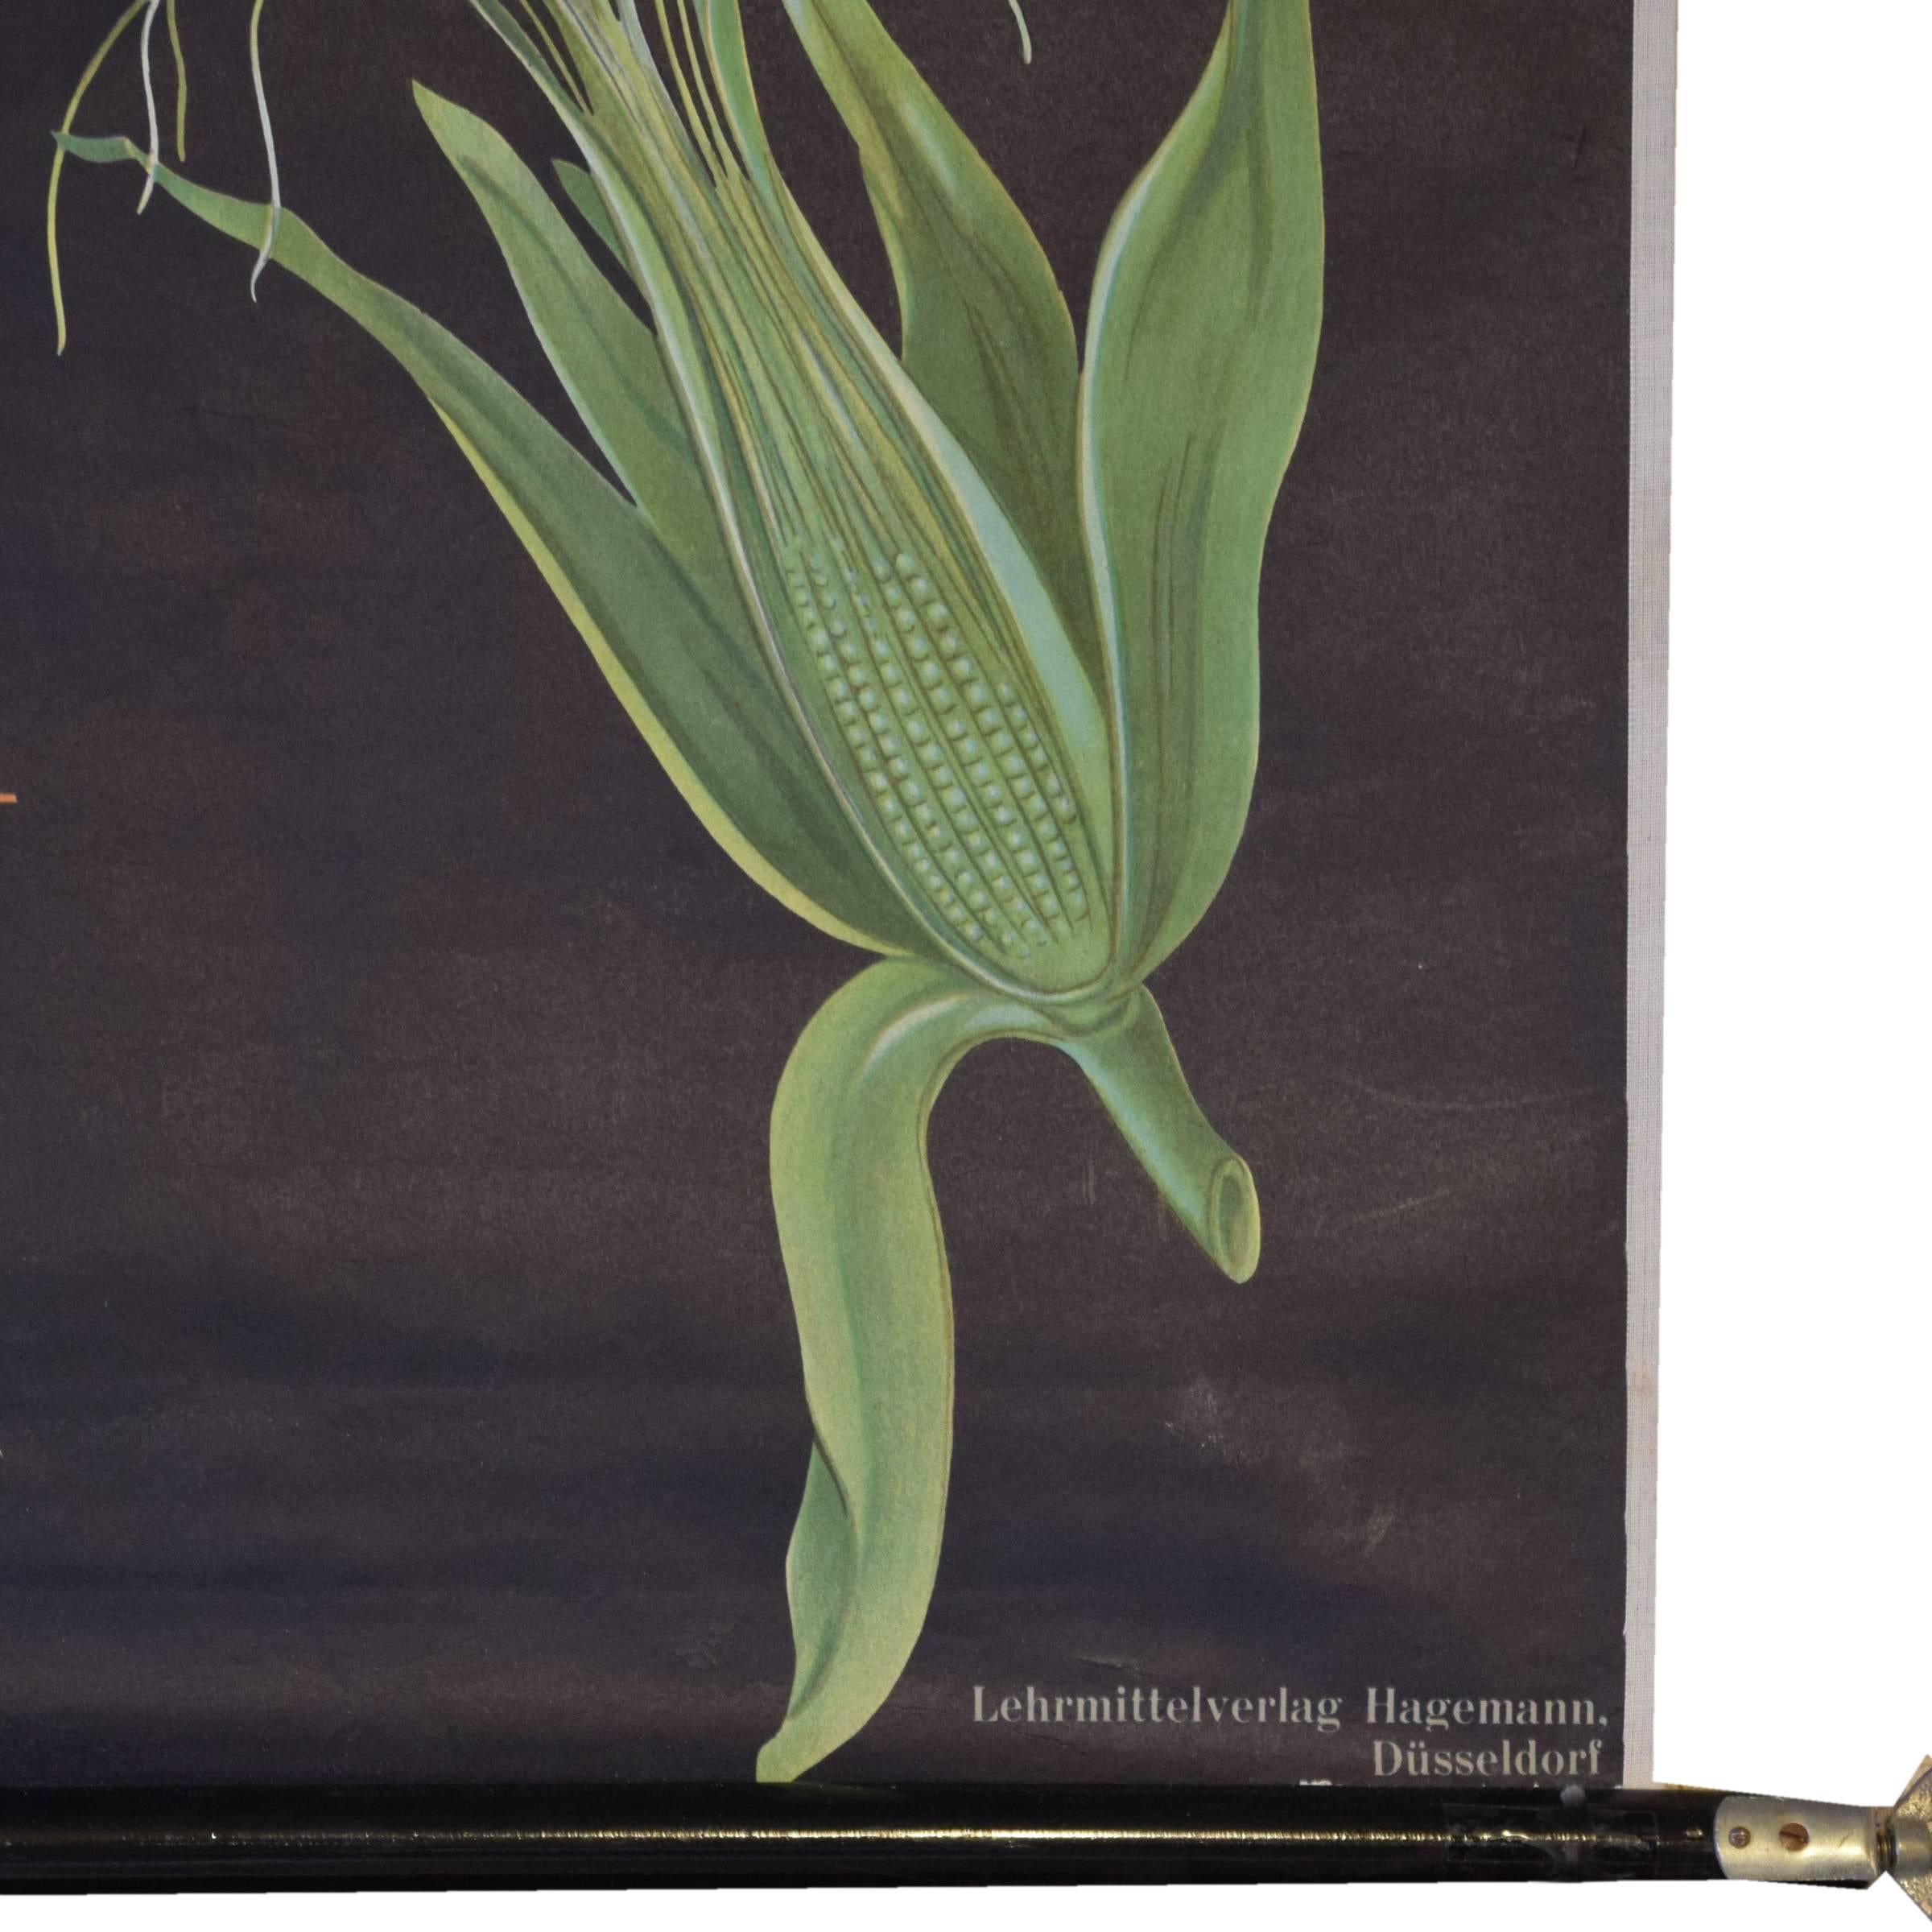 German education wall poster of corn illustrated by Jung-Koch-Quentell and published by Lehrmittelverlag Hagemann, Düsseldorf, the leading producer of educational botanical and zoological charts in the world.